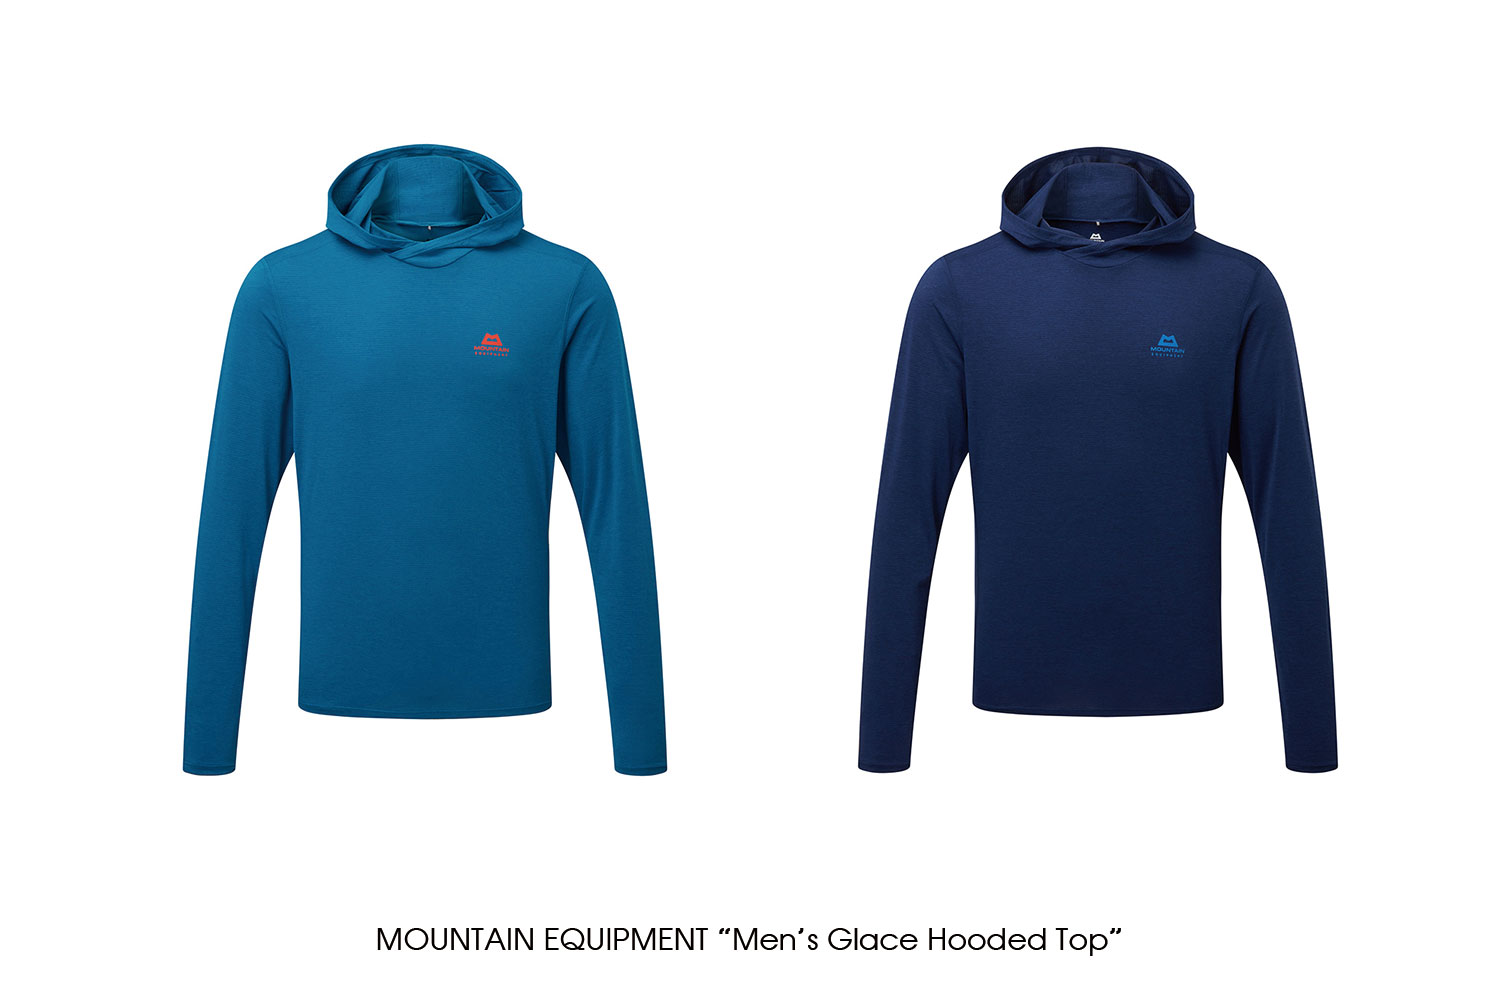 MOUNTAIN EQUIPMENT "Men's Glace Hooded Top"